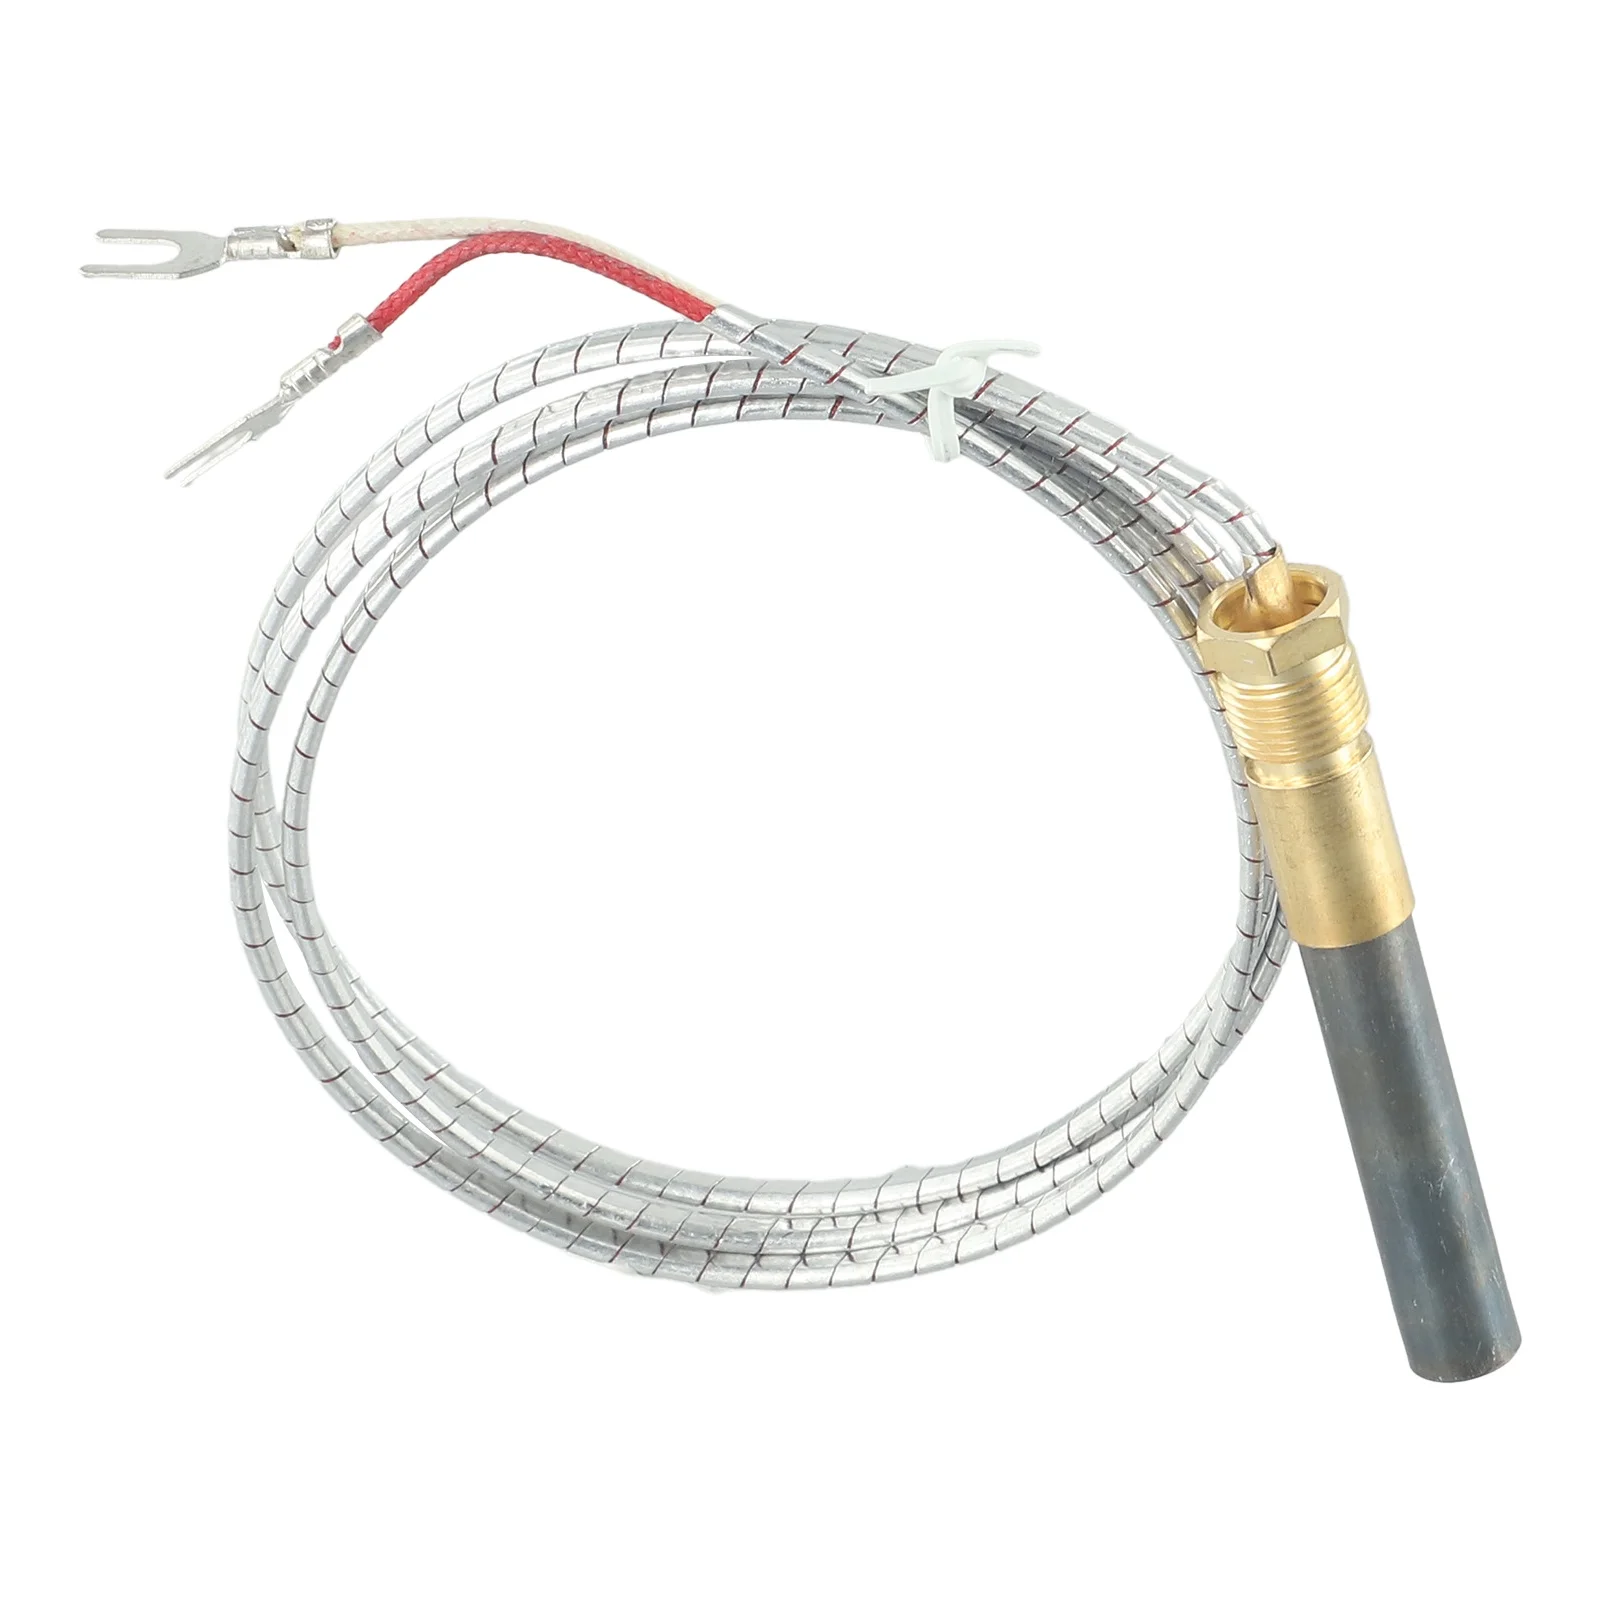 

Fireplaces Thermopile Thermopile Gas Fireplace Heater Temperature Hot Water Heater Pilot Generator Sensor Thermopile For Propane